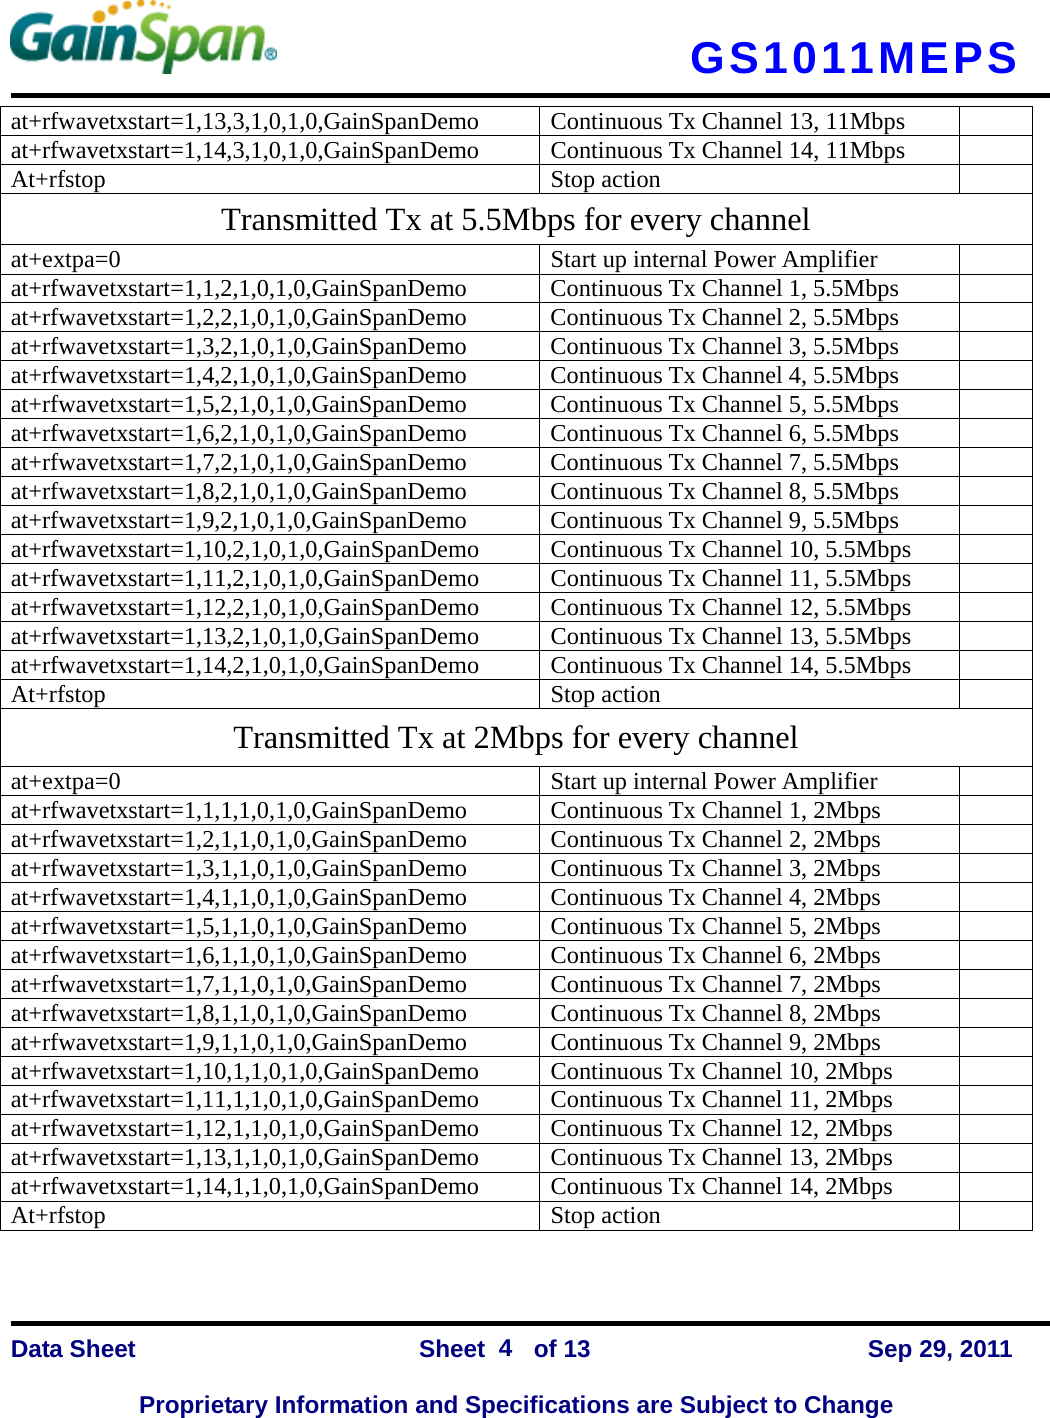   GS1011MEPS    Data Sheet                Sheet    of 13      Sep 29, 2011  Proprietary Information and Specifications are Subject to Change 4 at+rfwavetxstart=1,13,3,1,0,1,0,GainSpanDemo  Continuous Tx Channel 13, 11Mbps   at+rfwavetxstart=1,14,3,1,0,1,0,GainSpanDemo  Continuous Tx Channel 14, 11Mbps   At+rfstop Stop action  Transmitted Tx at 5.5Mbps for every channel at+extpa=0  Start up internal Power Amplifier   at+rfwavetxstart=1,1,2,1,0,1,0,GainSpanDemo  Continuous Tx Channel 1, 5.5Mbps   at+rfwavetxstart=1,2,2,1,0,1,0,GainSpanDemo  Continuous Tx Channel 2, 5.5Mbps   at+rfwavetxstart=1,3,2,1,0,1,0,GainSpanDemo  Continuous Tx Channel 3, 5.5Mbps   at+rfwavetxstart=1,4,2,1,0,1,0,GainSpanDemo  Continuous Tx Channel 4, 5.5Mbps   at+rfwavetxstart=1,5,2,1,0,1,0,GainSpanDemo  Continuous Tx Channel 5, 5.5Mbps   at+rfwavetxstart=1,6,2,1,0,1,0,GainSpanDemo  Continuous Tx Channel 6, 5.5Mbps   at+rfwavetxstart=1,7,2,1,0,1,0,GainSpanDemo  Continuous Tx Channel 7, 5.5Mbps   at+rfwavetxstart=1,8,2,1,0,1,0,GainSpanDemo  Continuous Tx Channel 8, 5.5Mbps   at+rfwavetxstart=1,9,2,1,0,1,0,GainSpanDemo  Continuous Tx Channel 9, 5.5Mbps   at+rfwavetxstart=1,10,2,1,0,1,0,GainSpanDemo  Continuous Tx Channel 10, 5.5Mbps   at+rfwavetxstart=1,11,2,1,0,1,0,GainSpanDemo  Continuous Tx Channel 11, 5.5Mbps   at+rfwavetxstart=1,12,2,1,0,1,0,GainSpanDemo  Continuous Tx Channel 12, 5.5Mbps   at+rfwavetxstart=1,13,2,1,0,1,0,GainSpanDemo  Continuous Tx Channel 13, 5.5Mbps   at+rfwavetxstart=1,14,2,1,0,1,0,GainSpanDemo  Continuous Tx Channel 14, 5.5Mbps   At+rfstop Stop action  Transmitted Tx at 2Mbps for every channel at+extpa=0  Start up internal Power Amplifier   at+rfwavetxstart=1,1,1,1,0,1,0,GainSpanDemo  Continuous Tx Channel 1, 2Mbps   at+rfwavetxstart=1,2,1,1,0,1,0,GainSpanDemo  Continuous Tx Channel 2, 2Mbps   at+rfwavetxstart=1,3,1,1,0,1,0,GainSpanDemo  Continuous Tx Channel 3, 2Mbps   at+rfwavetxstart=1,4,1,1,0,1,0,GainSpanDemo  Continuous Tx Channel 4, 2Mbps   at+rfwavetxstart=1,5,1,1,0,1,0,GainSpanDemo  Continuous Tx Channel 5, 2Mbps   at+rfwavetxstart=1,6,1,1,0,1,0,GainSpanDemo  Continuous Tx Channel 6, 2Mbps   at+rfwavetxstart=1,7,1,1,0,1,0,GainSpanDemo  Continuous Tx Channel 7, 2Mbps   at+rfwavetxstart=1,8,1,1,0,1,0,GainSpanDemo  Continuous Tx Channel 8, 2Mbps   at+rfwavetxstart=1,9,1,1,0,1,0,GainSpanDemo  Continuous Tx Channel 9, 2Mbps   at+rfwavetxstart=1,10,1,1,0,1,0,GainSpanDemo  Continuous Tx Channel 10, 2Mbps   at+rfwavetxstart=1,11,1,1,0,1,0,GainSpanDemo  Continuous Tx Channel 11, 2Mbps   at+rfwavetxstart=1,12,1,1,0,1,0,GainSpanDemo  Continuous Tx Channel 12, 2Mbps   at+rfwavetxstart=1,13,1,1,0,1,0,GainSpanDemo  Continuous Tx Channel 13, 2Mbps   at+rfwavetxstart=1,14,1,1,0,1,0,GainSpanDemo  Continuous Tx Channel 14, 2Mbps   At+rfstop Stop action  